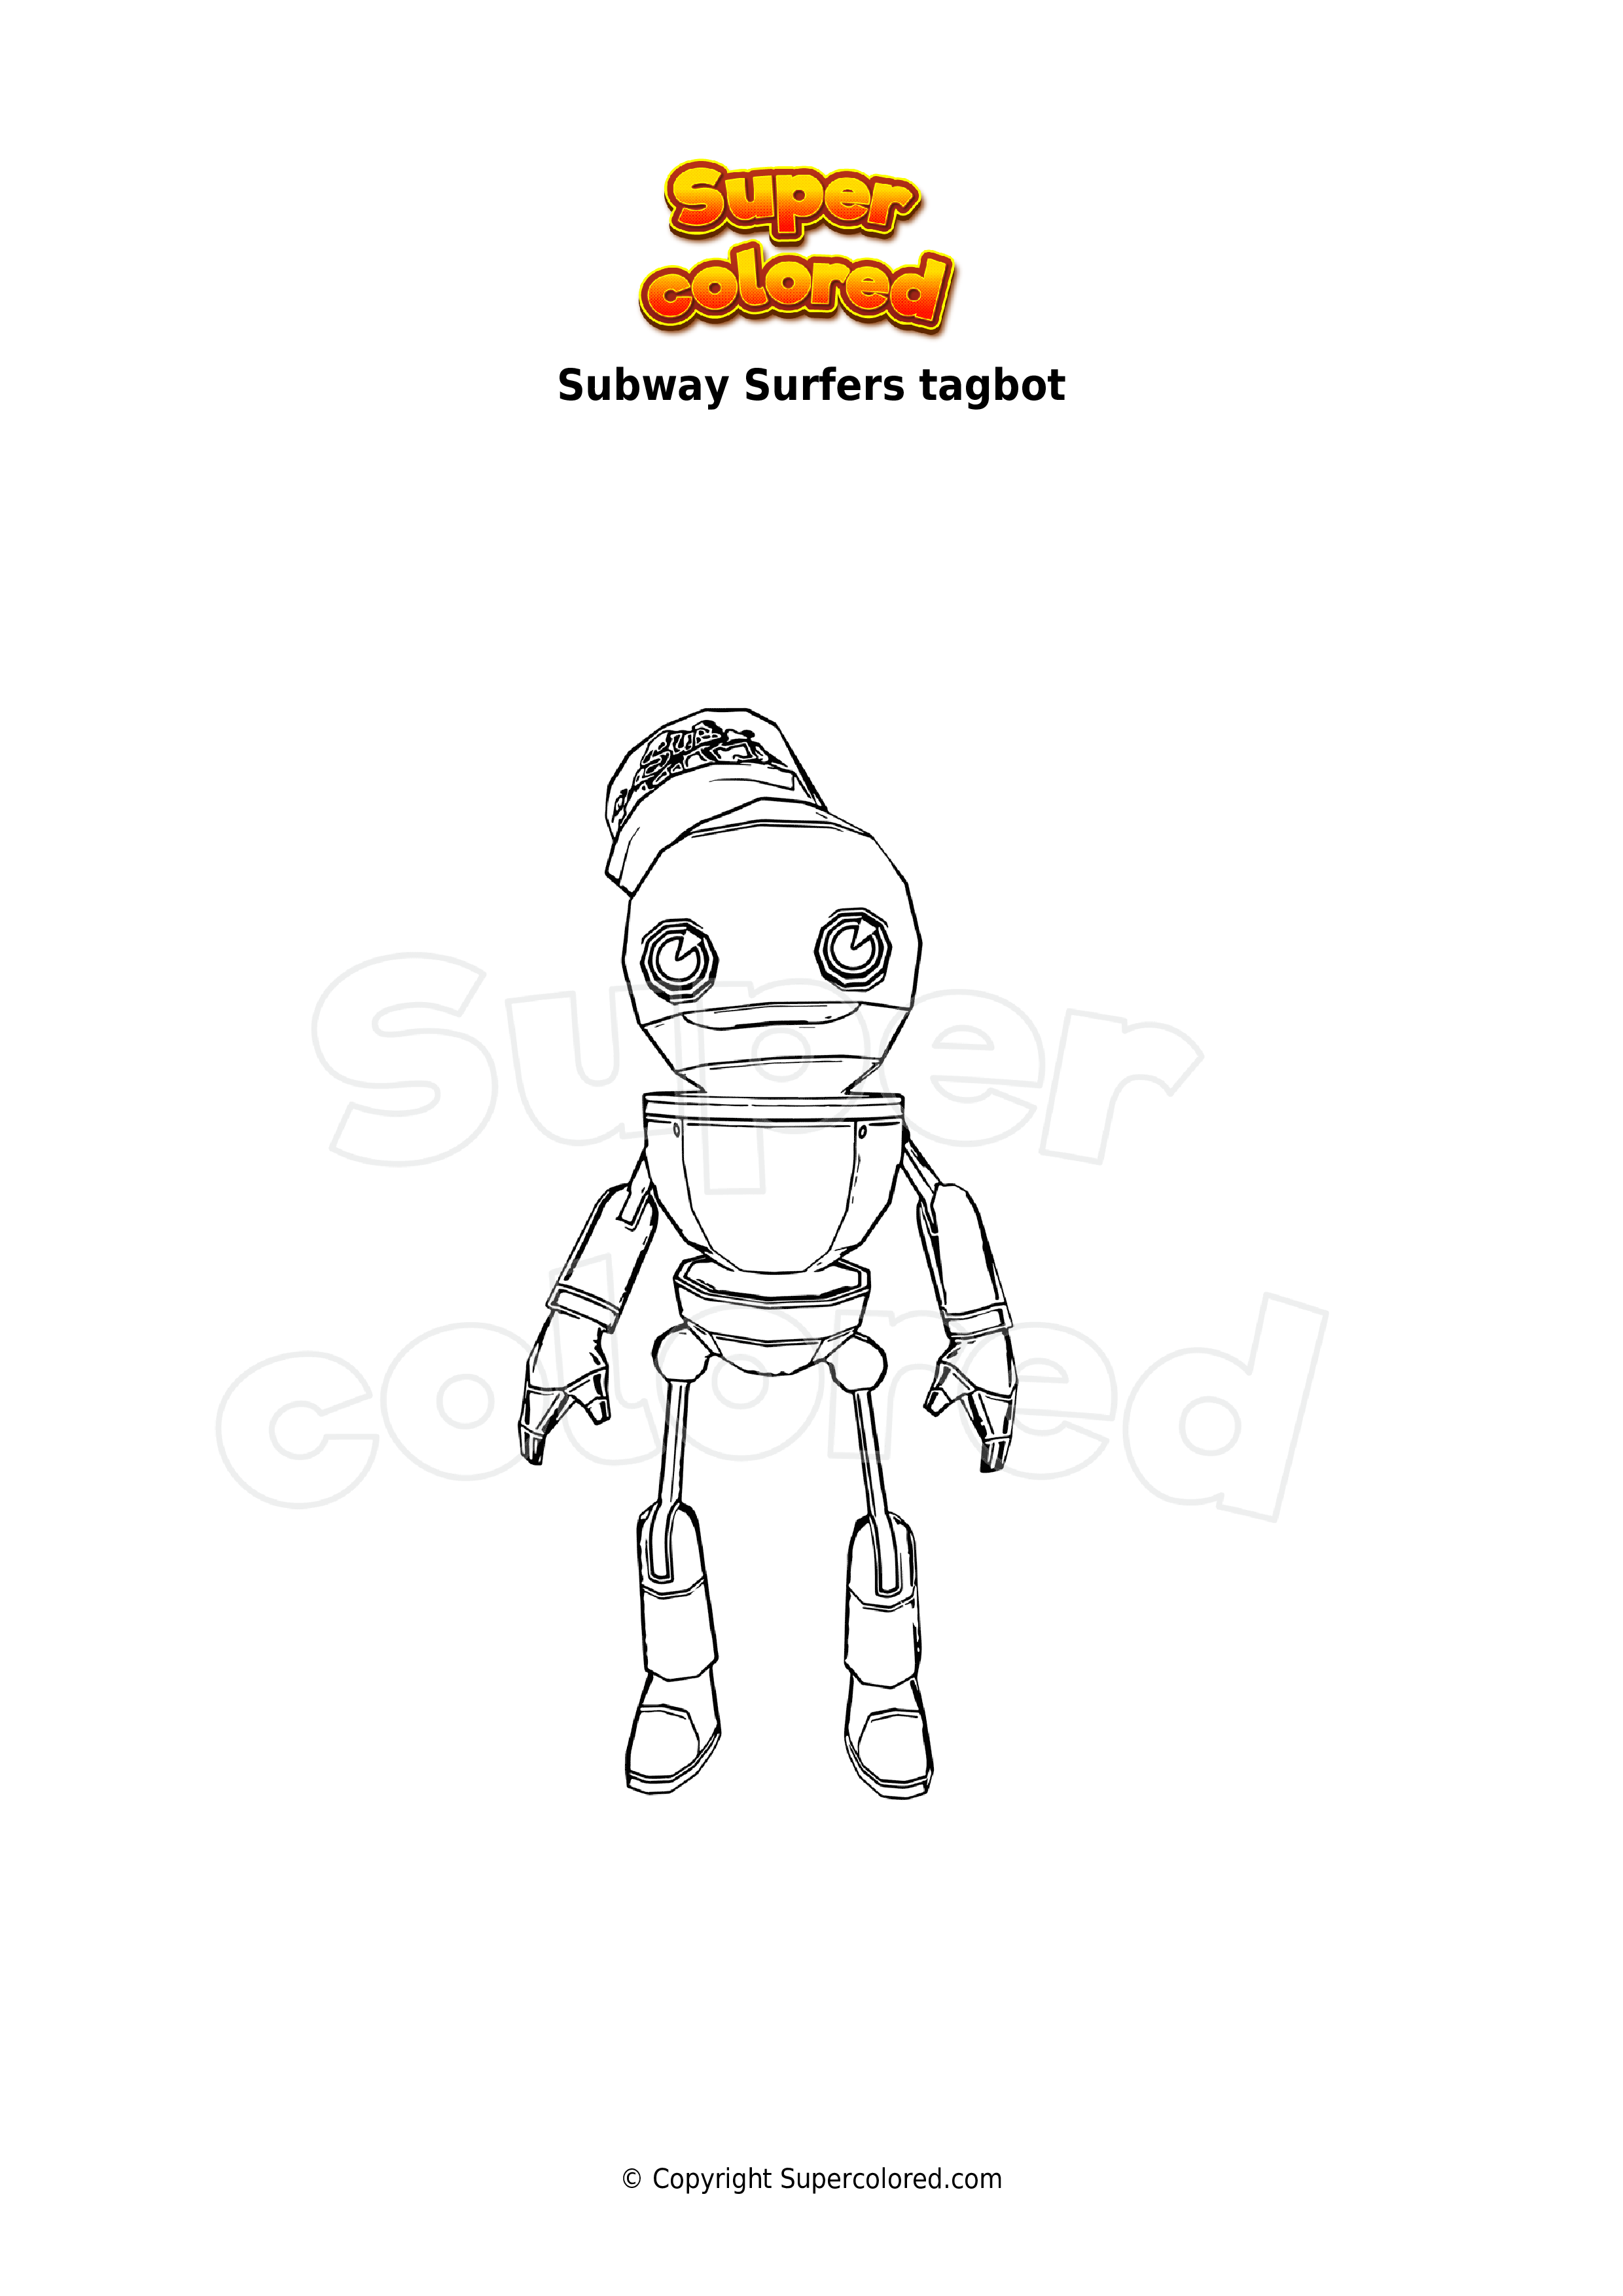 coloring page subway surfers tagbot eb0750